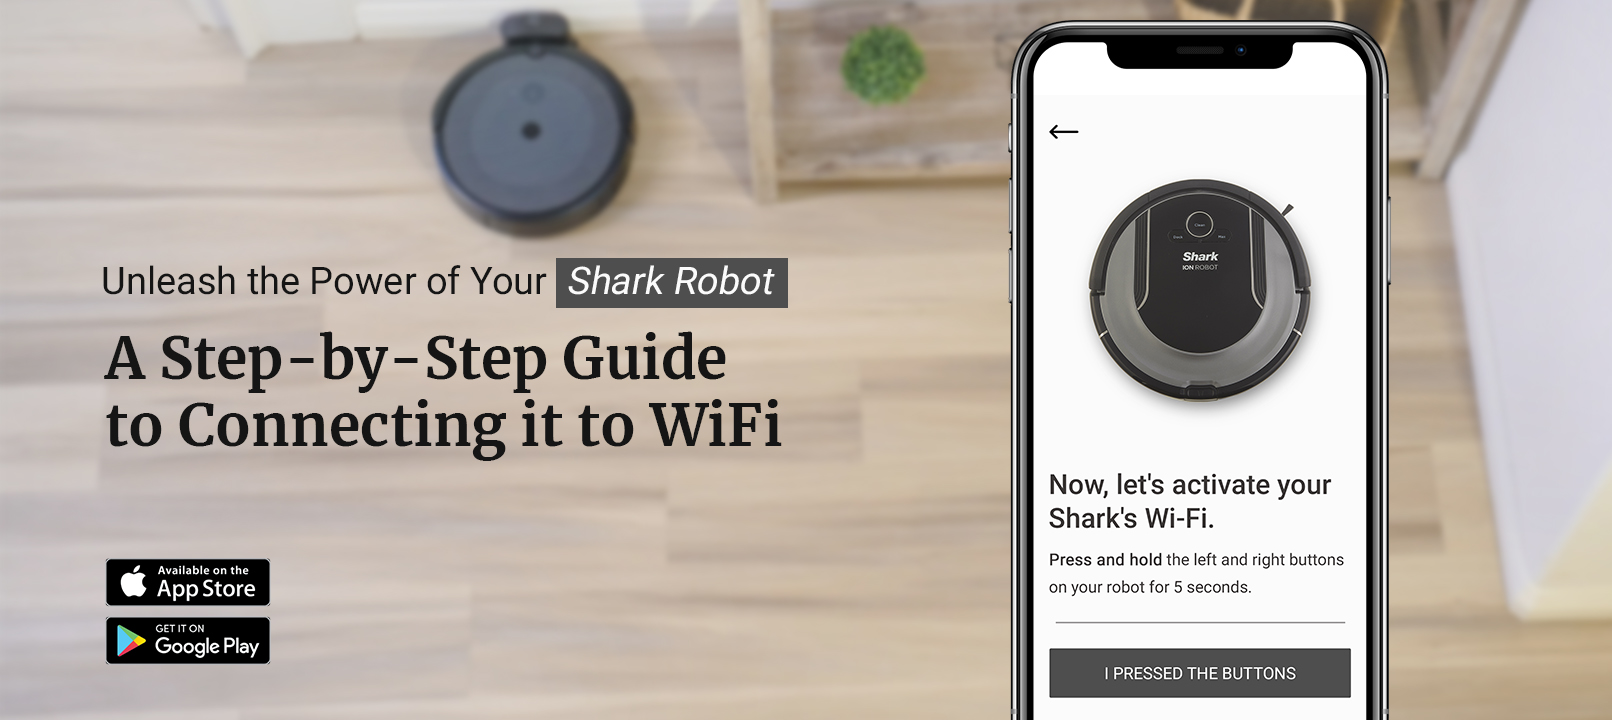 How To Connect Shark Robot To WiFi